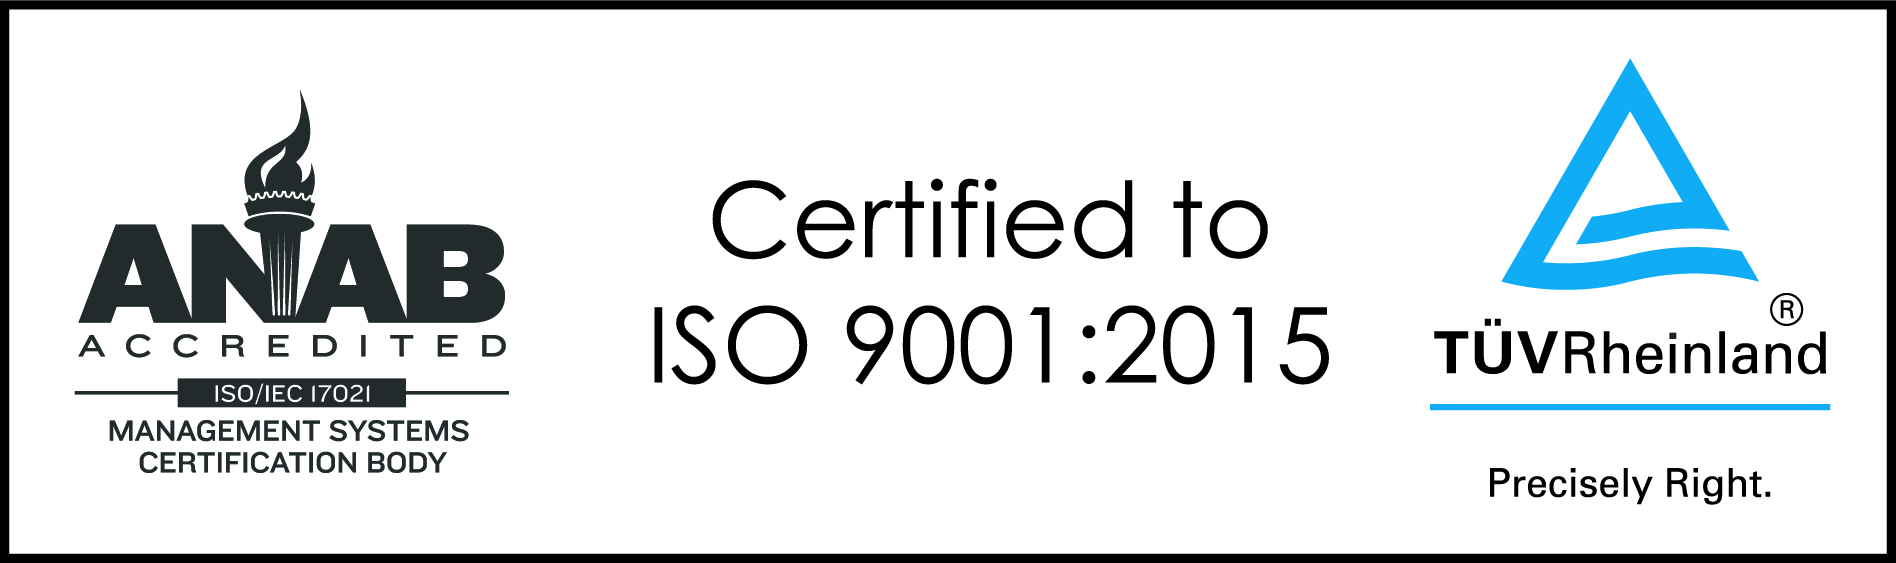 Certified to ISO 9001:2015